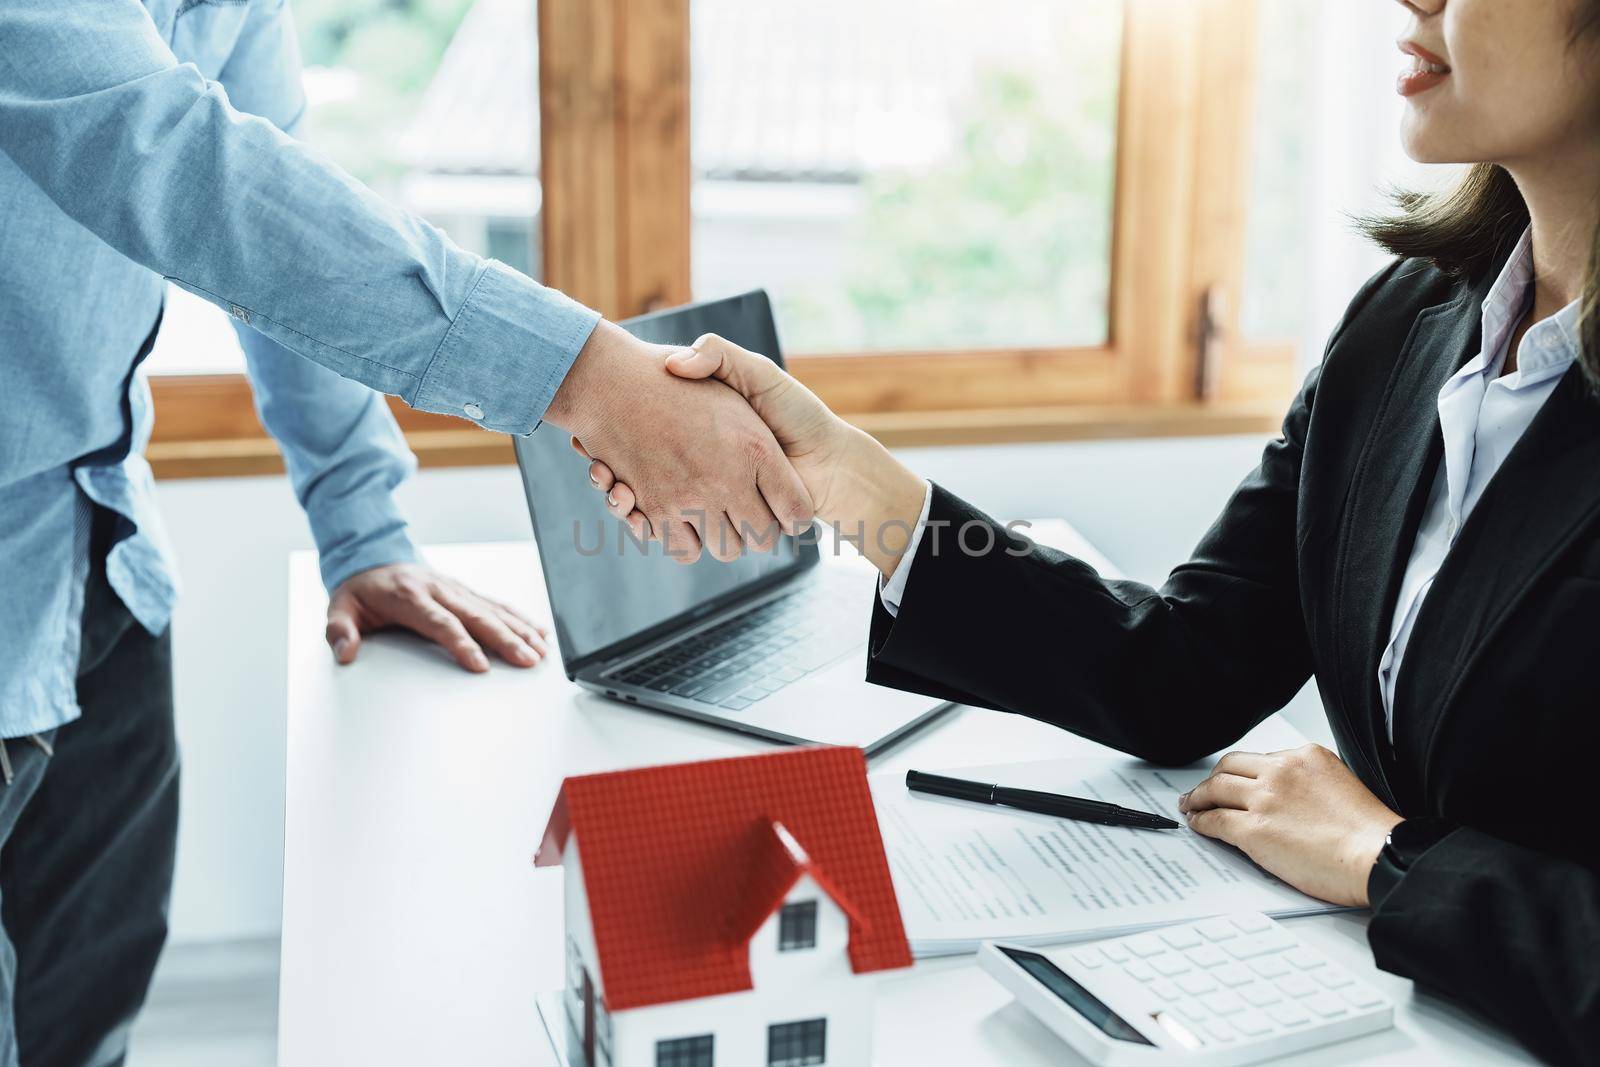 Laws, contracts, mortgages, clients join hands with real estate agents congratulating real estate agents on home and land purchase agreements with insurance to reduce risks during home installments by Manastrong